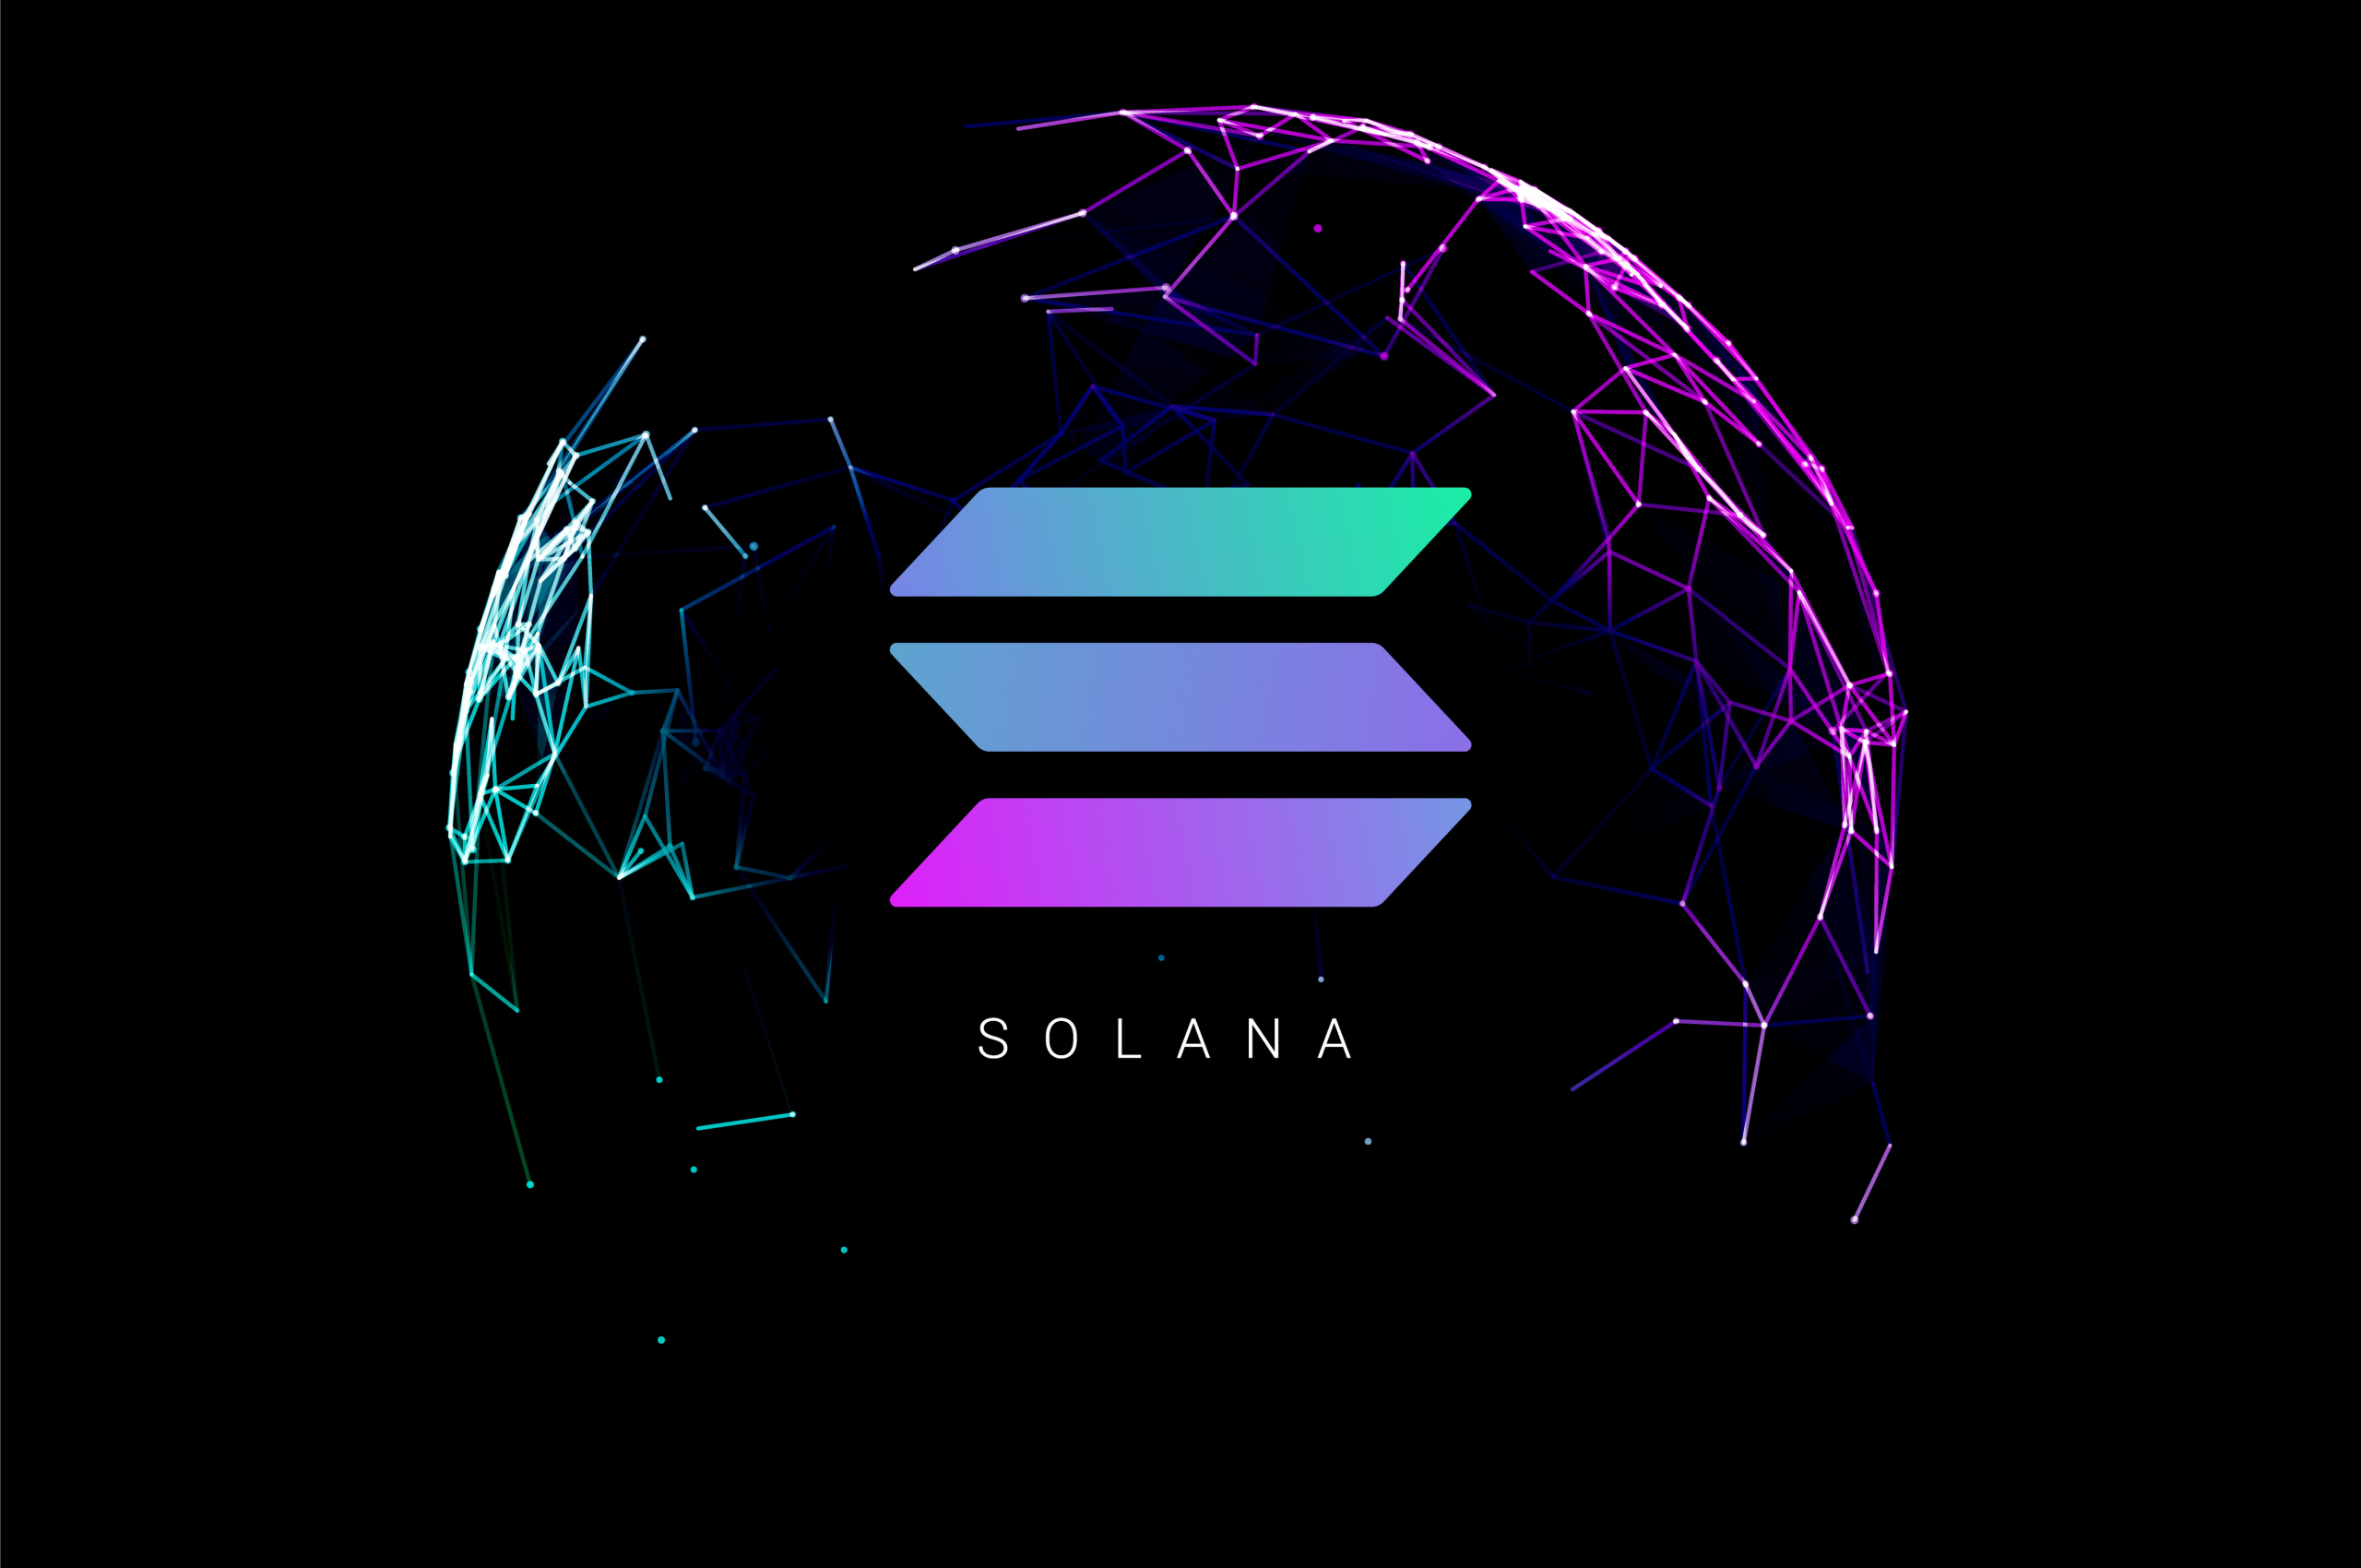 Solana suffers again from failing network
